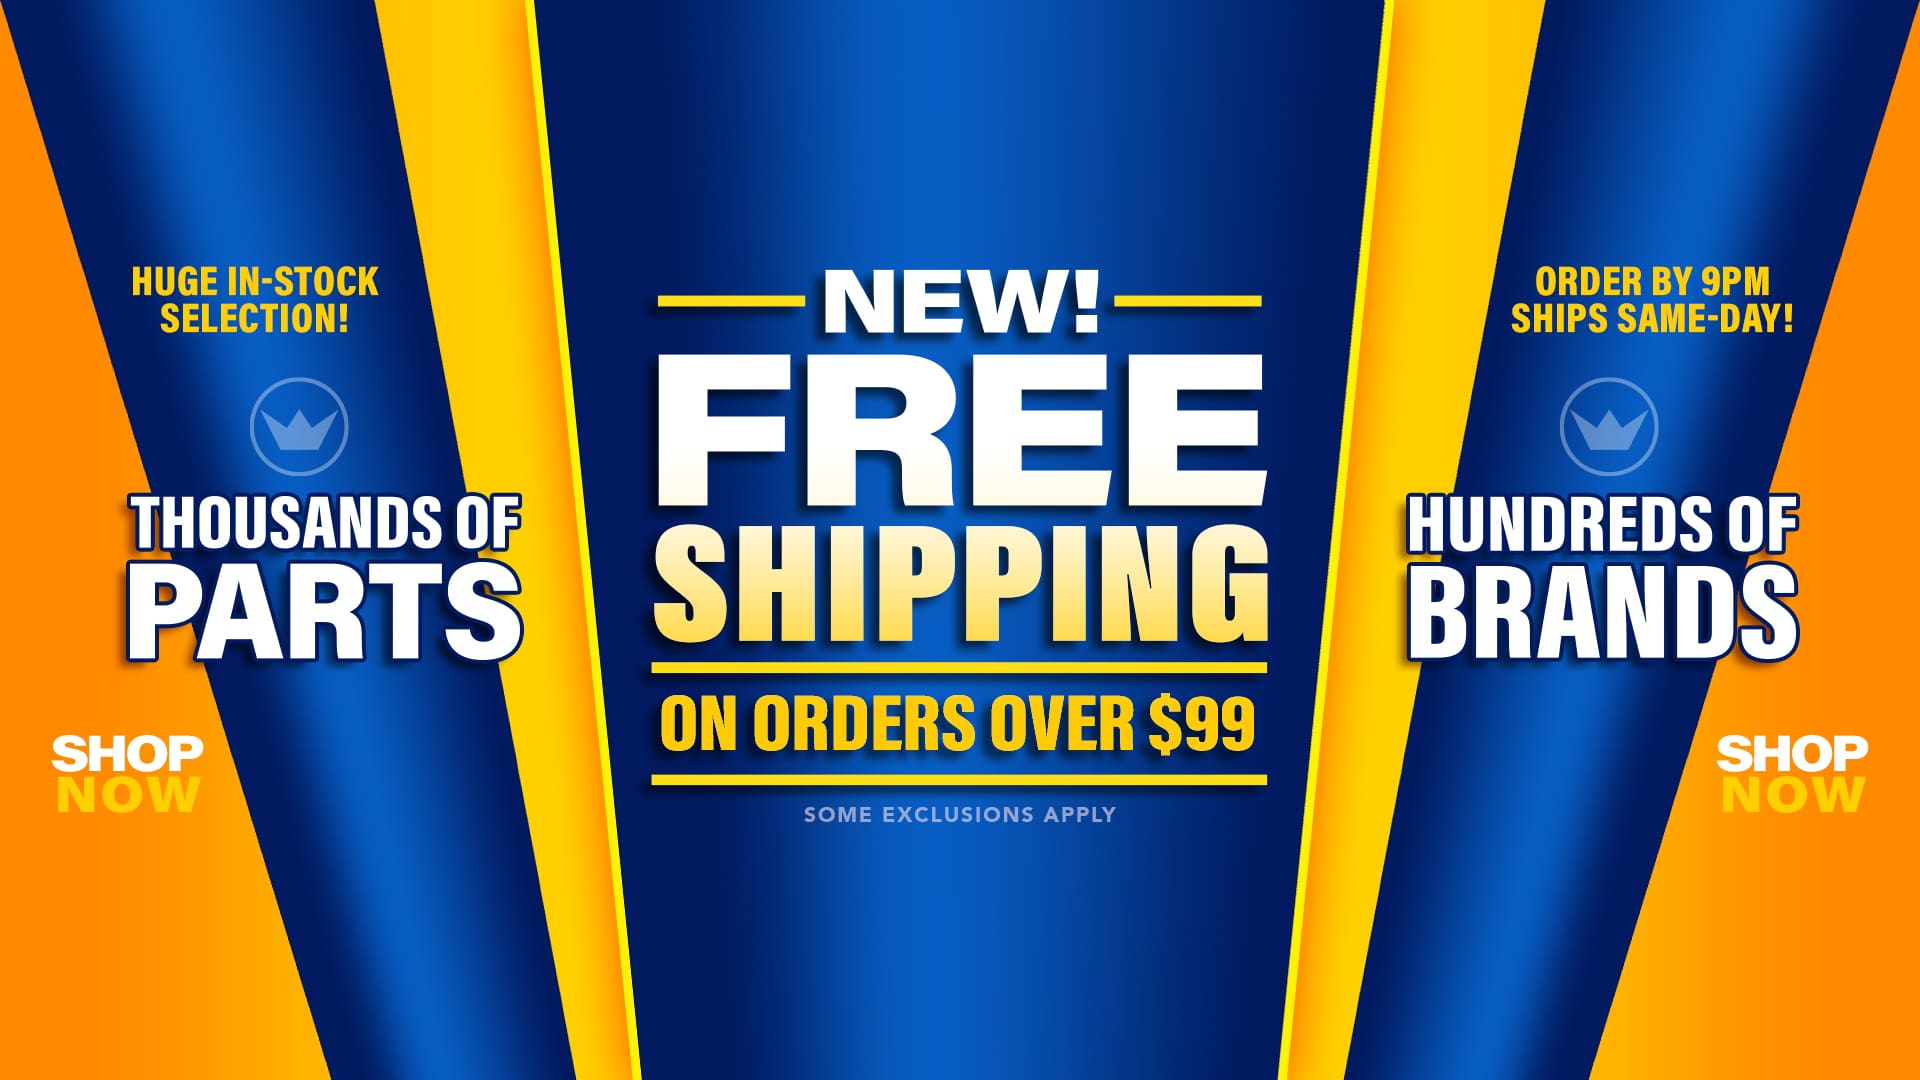 New: Free Shipping On Orders Over $99 - Check Out These Savings On These Products